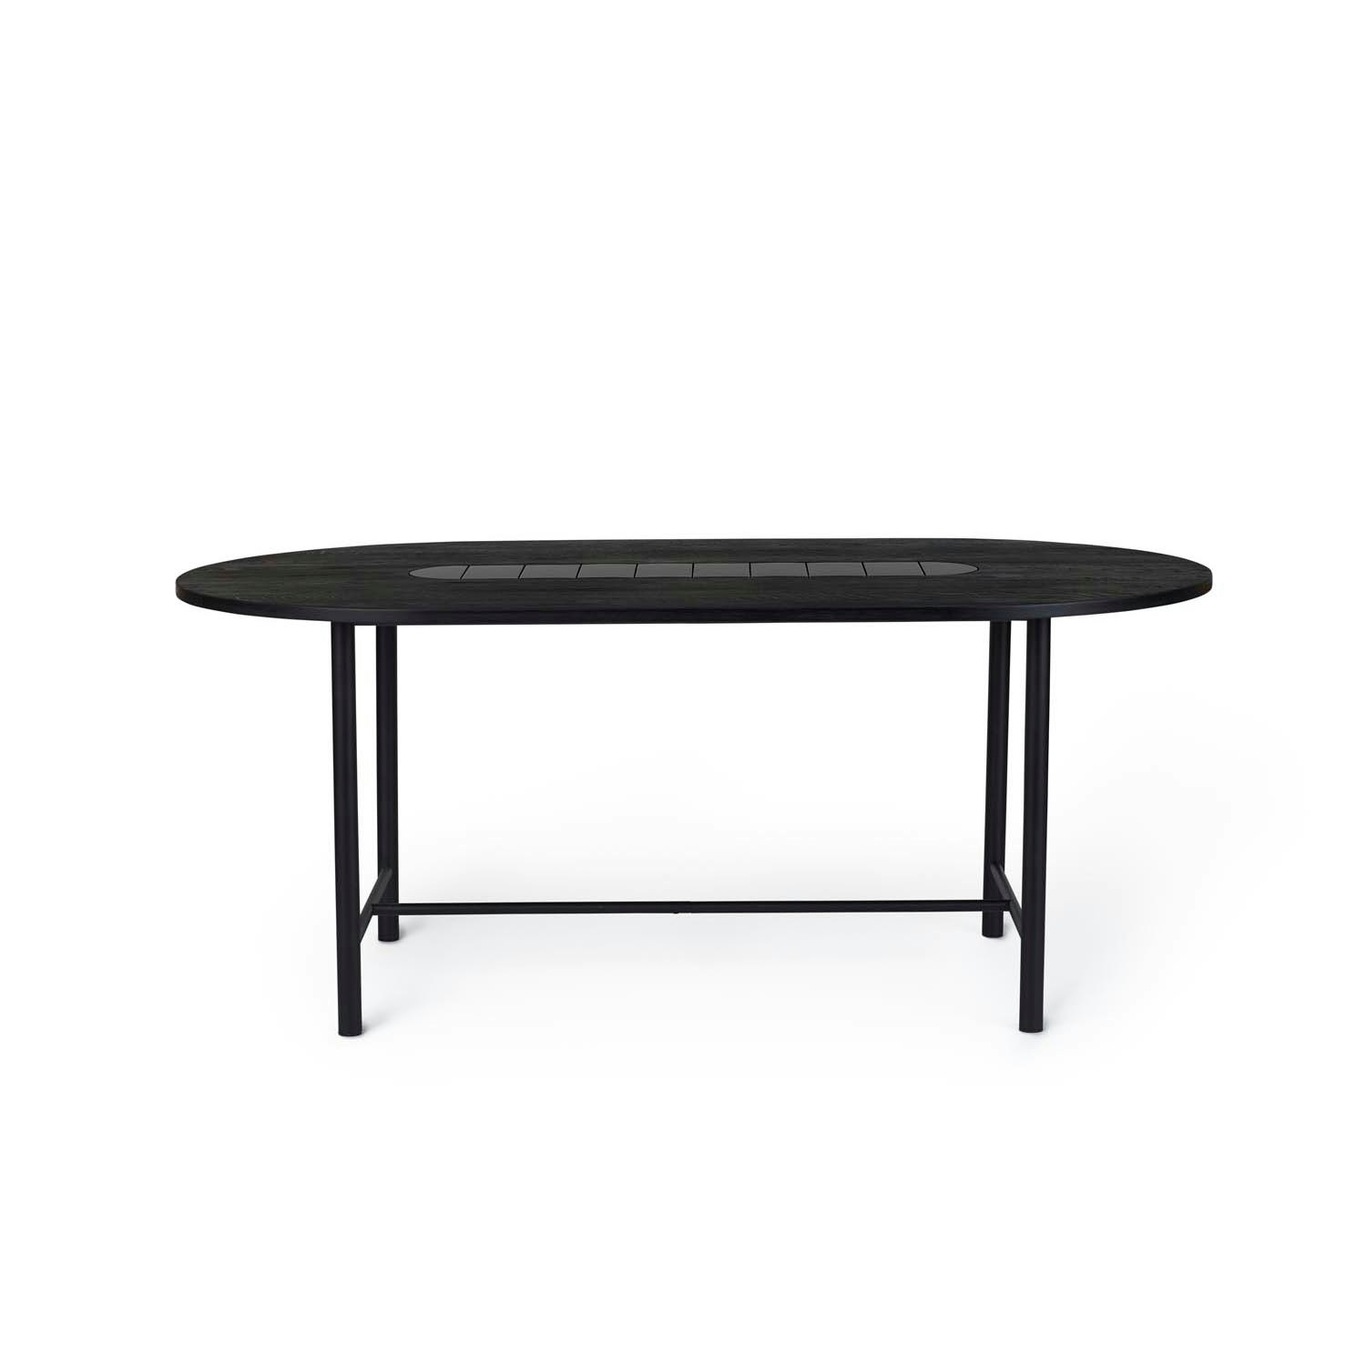 Be My Guest Dining Table 180 cm, Black Oiled Oak